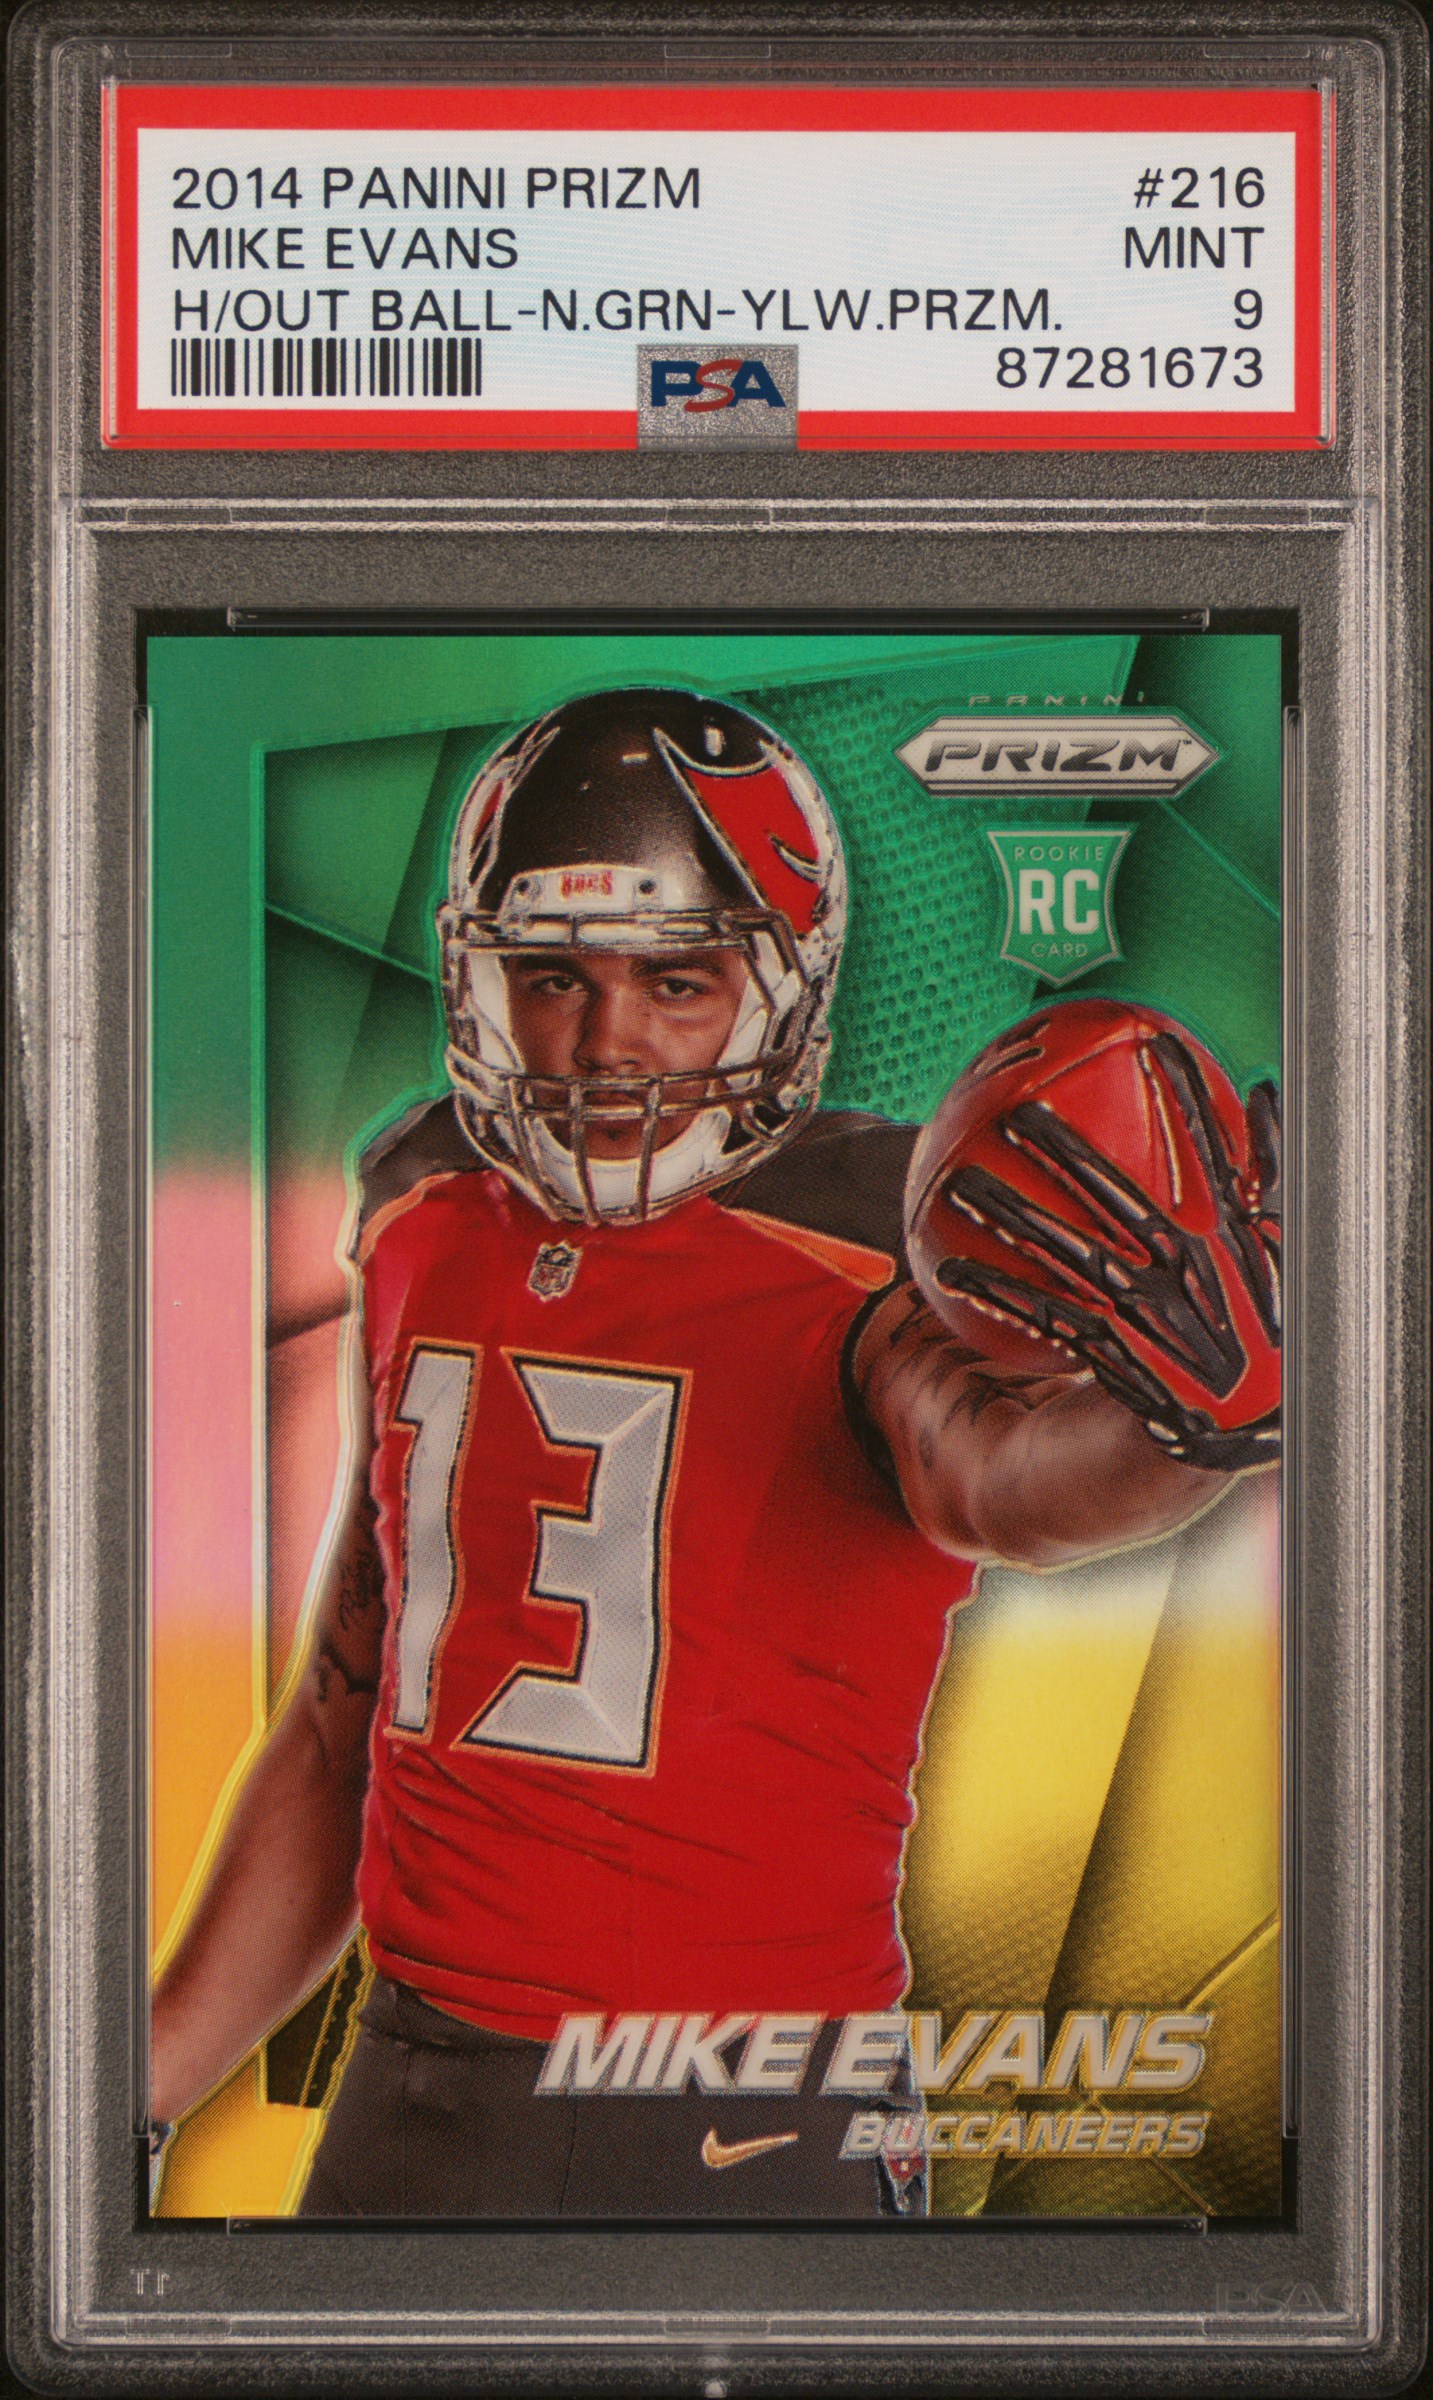 2014 Panini Prizm Holding Out Ball-Neon Green-Yellow Prizm #216 Mike Evans Rookie Card – PSA MINT 9